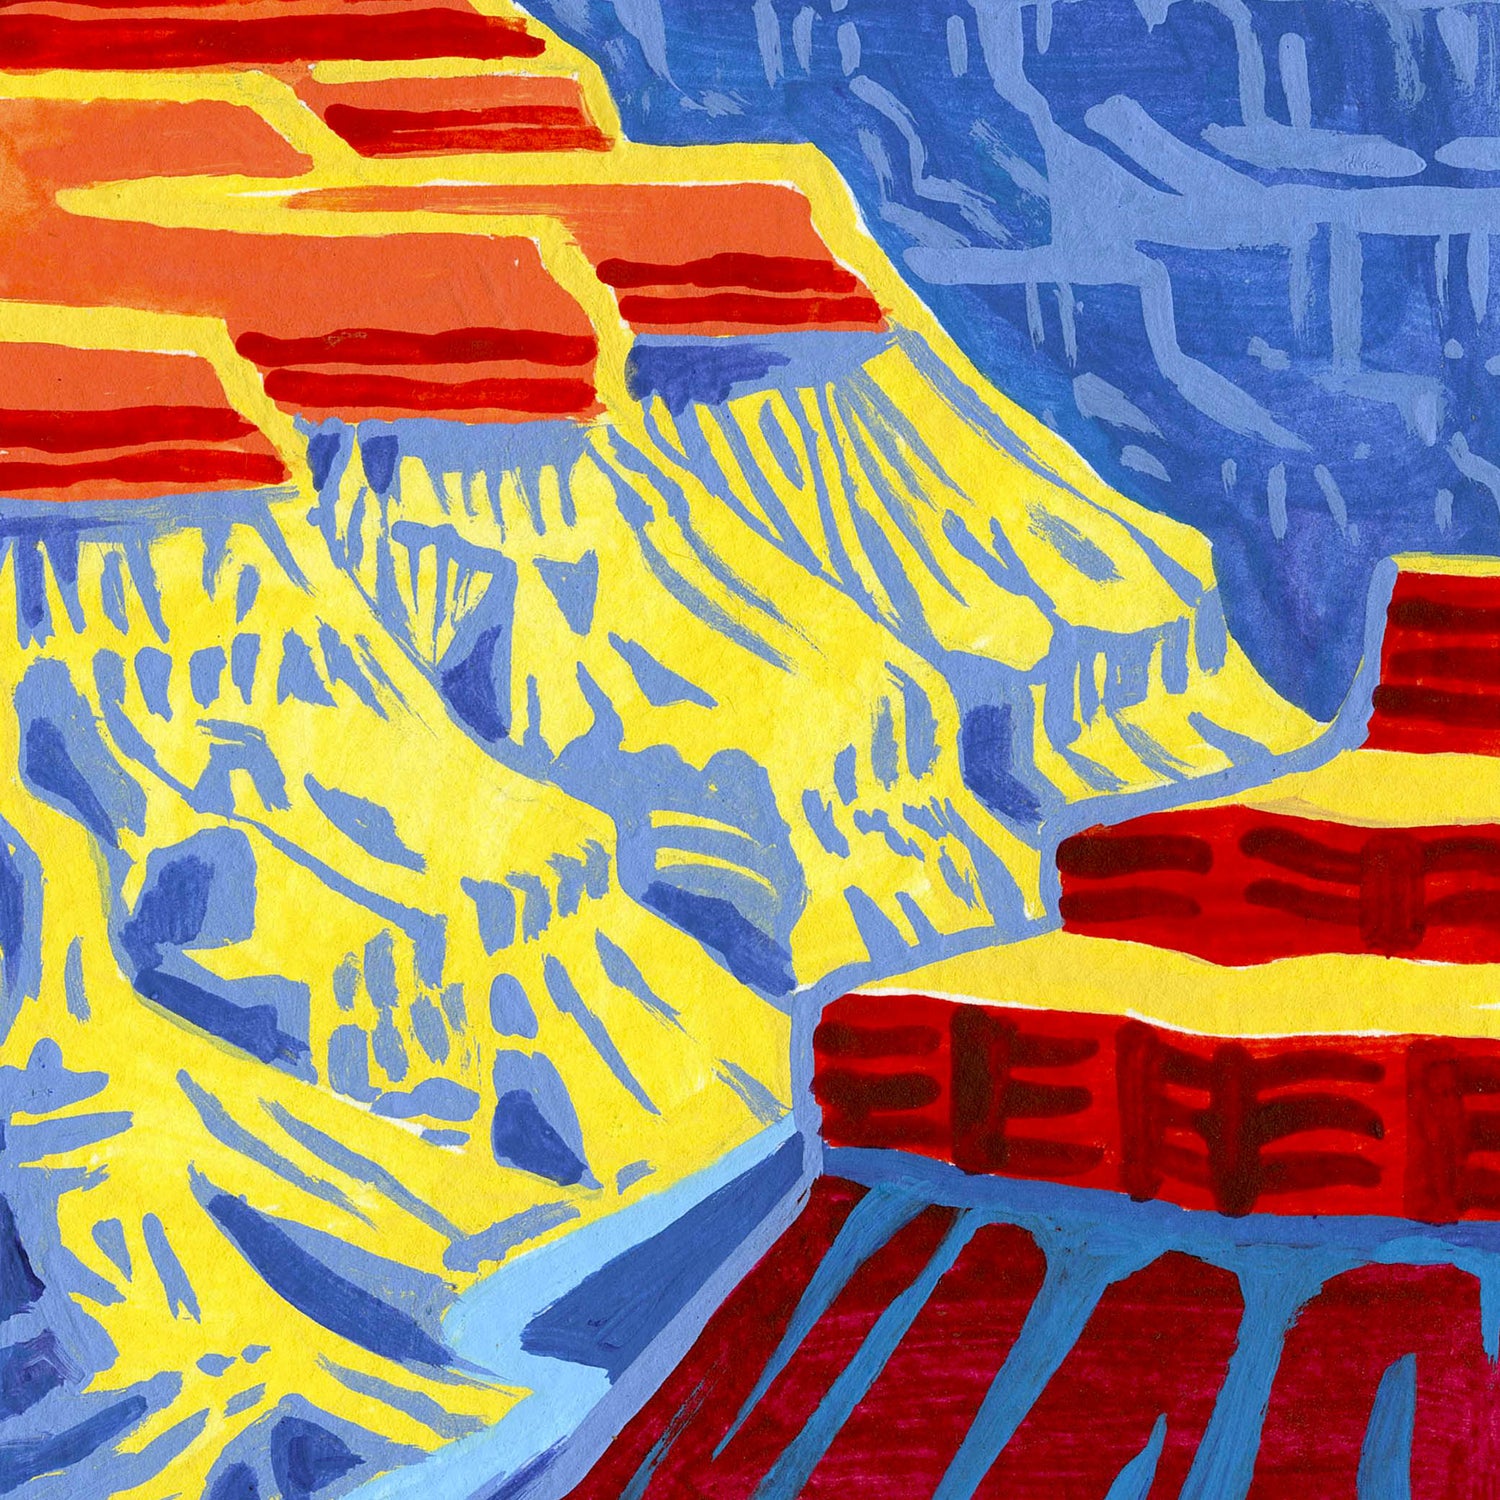 Grand Canyon National Park art detail with layered bands of red rock and sunset; trendy illustration by Angela Staehling